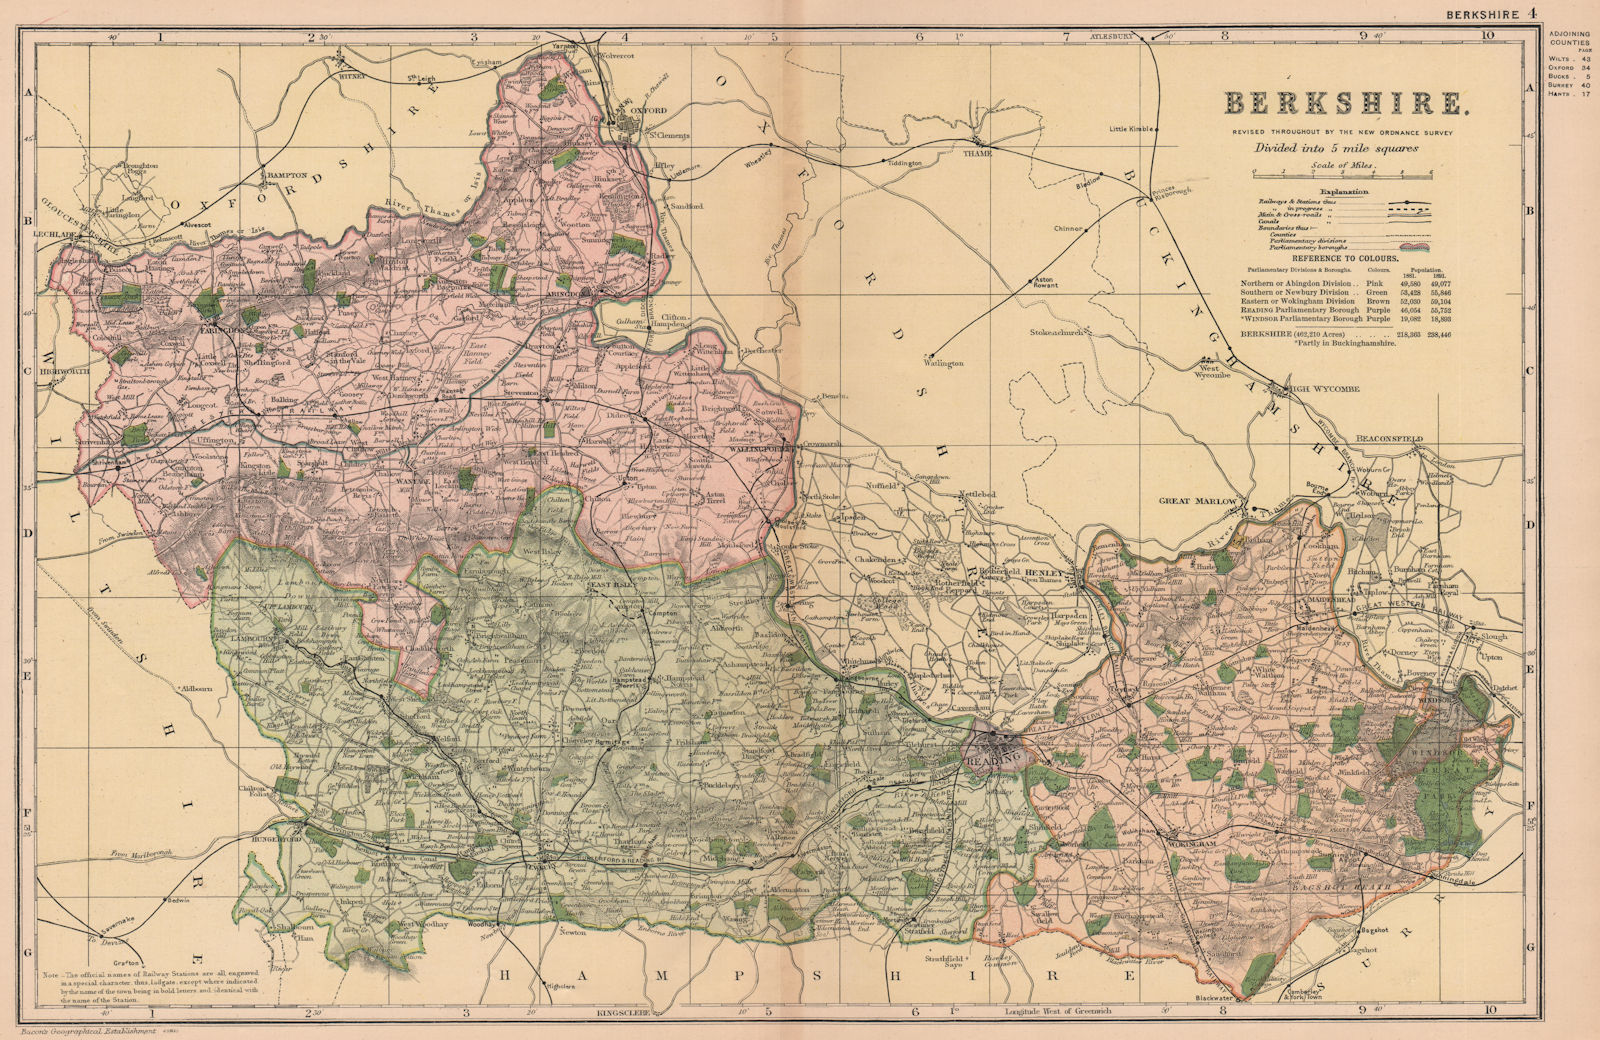 BERKSHIRE. Showing Parliamentary divisions, boroughs & parks. BACON 1901 map